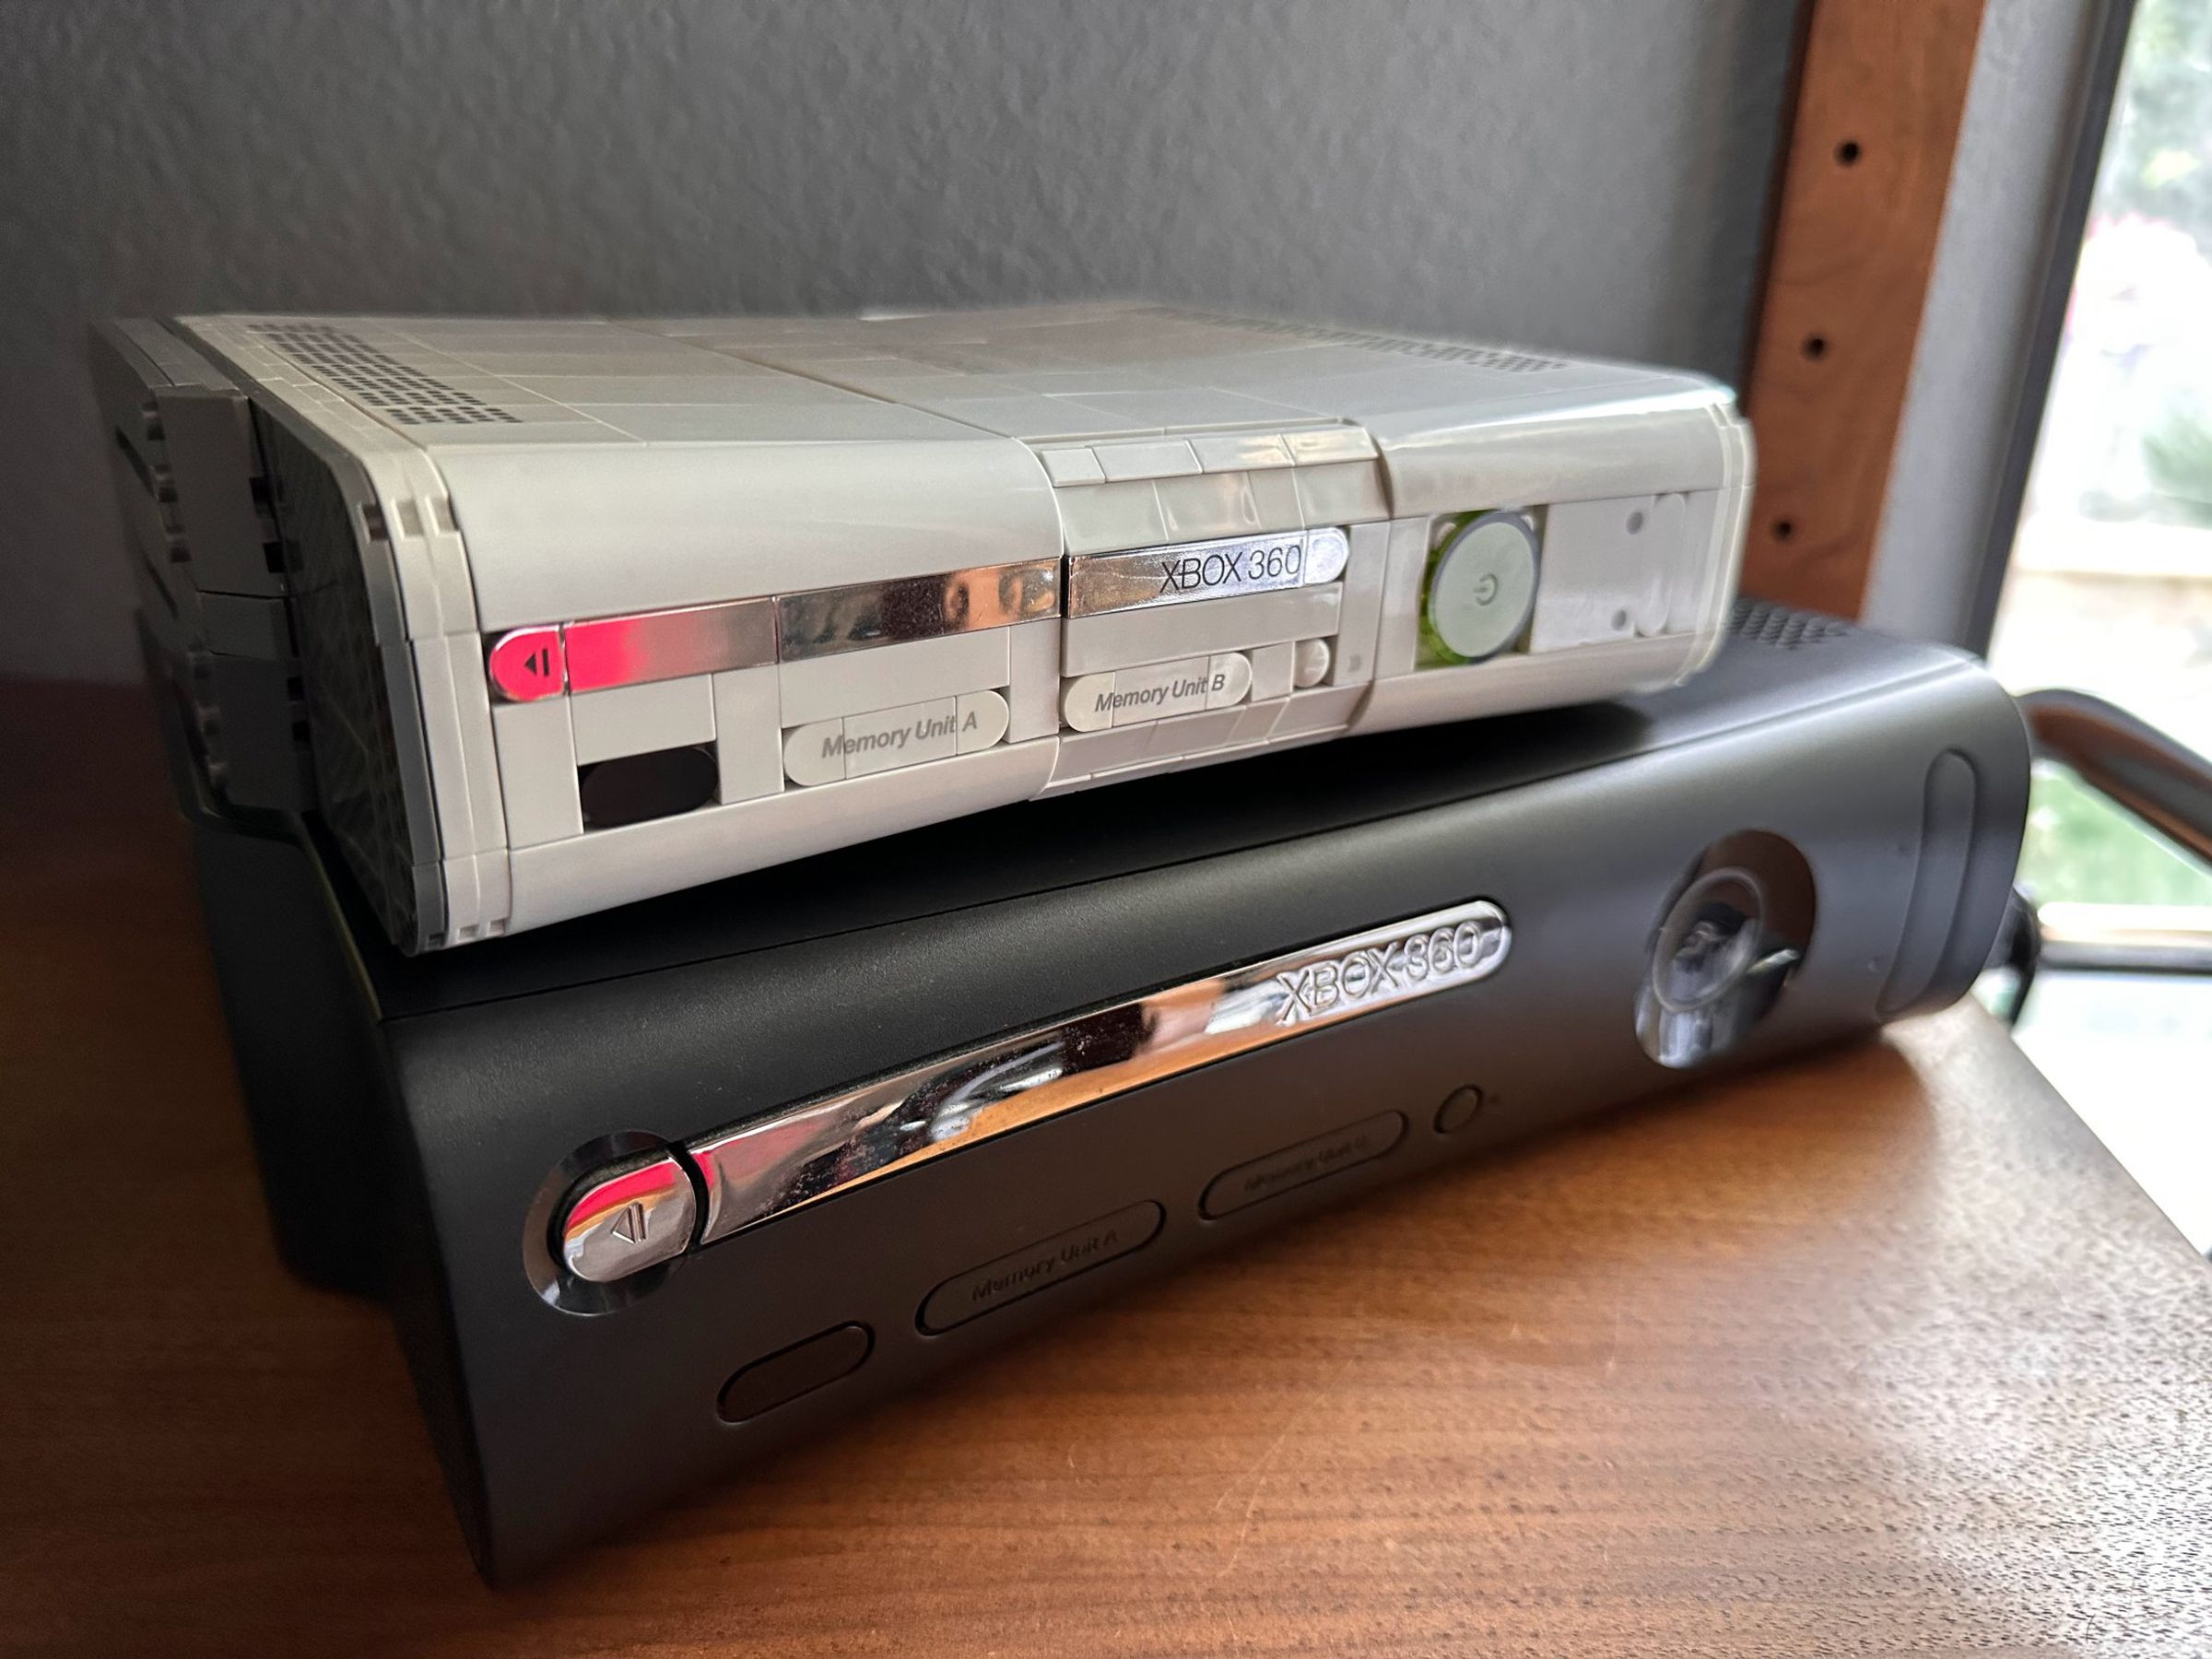 Compared to my “Jasper” Xbox 360 Elite, the best 360 ever made. The brick disc drive slot replicates the shiny chrome. Neither it nor memory card or USB slots open on the brick version, though.